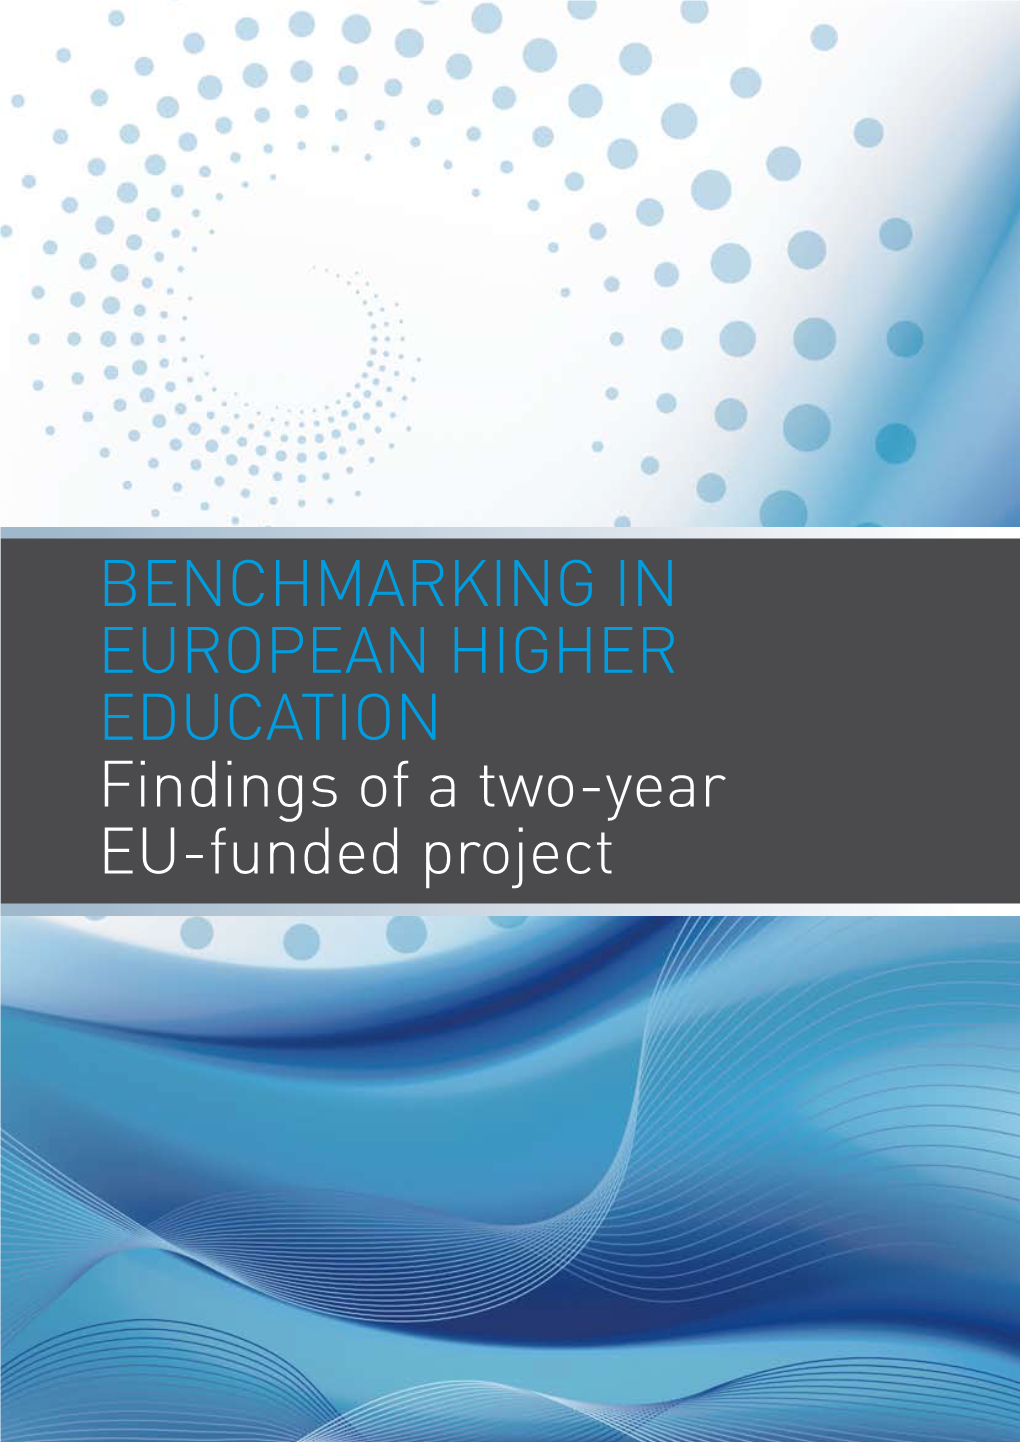 Benchmarking in European Higher Education Findings of a Two-Year EU-Funded Project